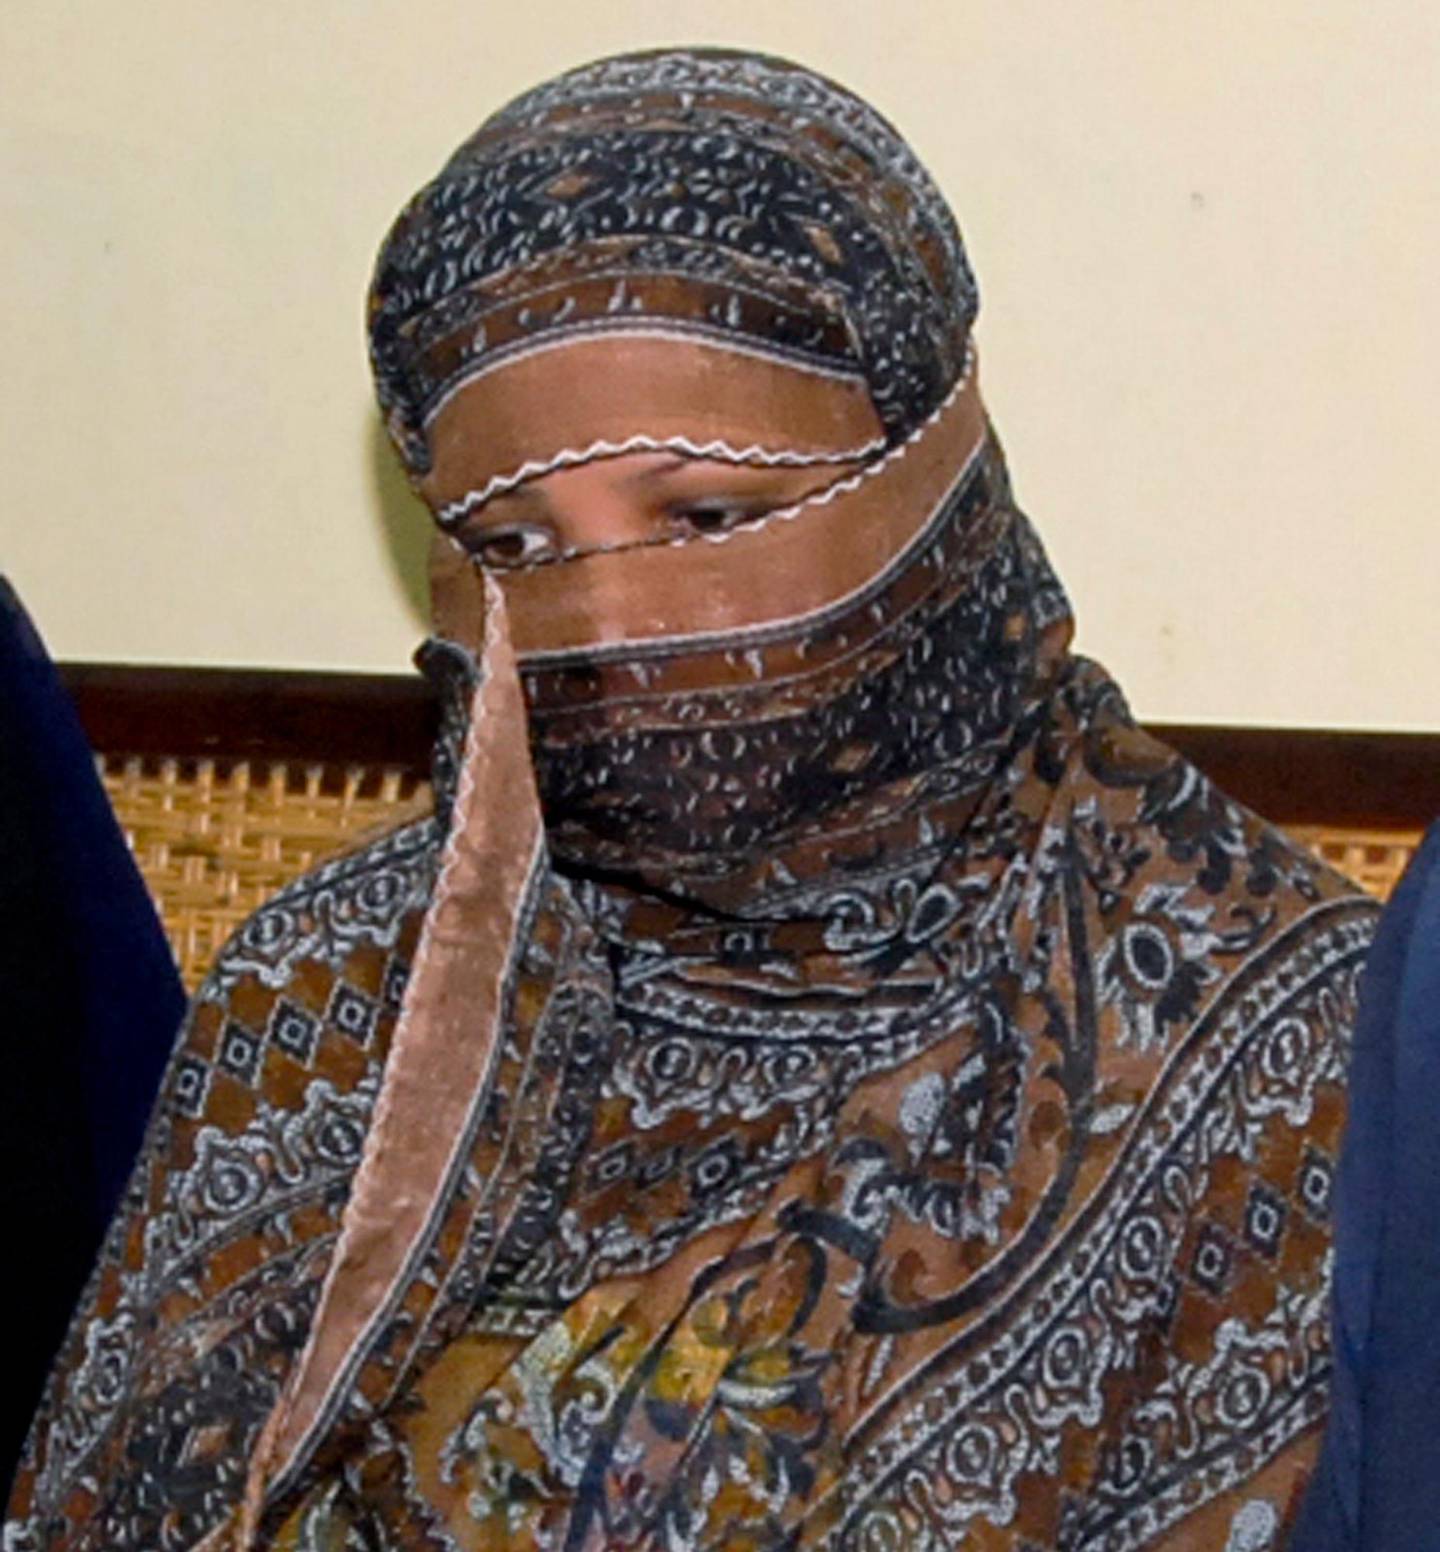 FILE - In this Nov. 20, 2010, file photo, Asia Bibi, a Pakistani Christian woman, listens to officials at a prison in Sheikhupura near Lahore, Pakistan. Italy is working to help relocate the family of a Pakistani Christian woman acquitted eight years after being sentenced to death for blasphemy, amid warnings from her husband that their life is in danger in Pakistan.  (AP Photo, File)